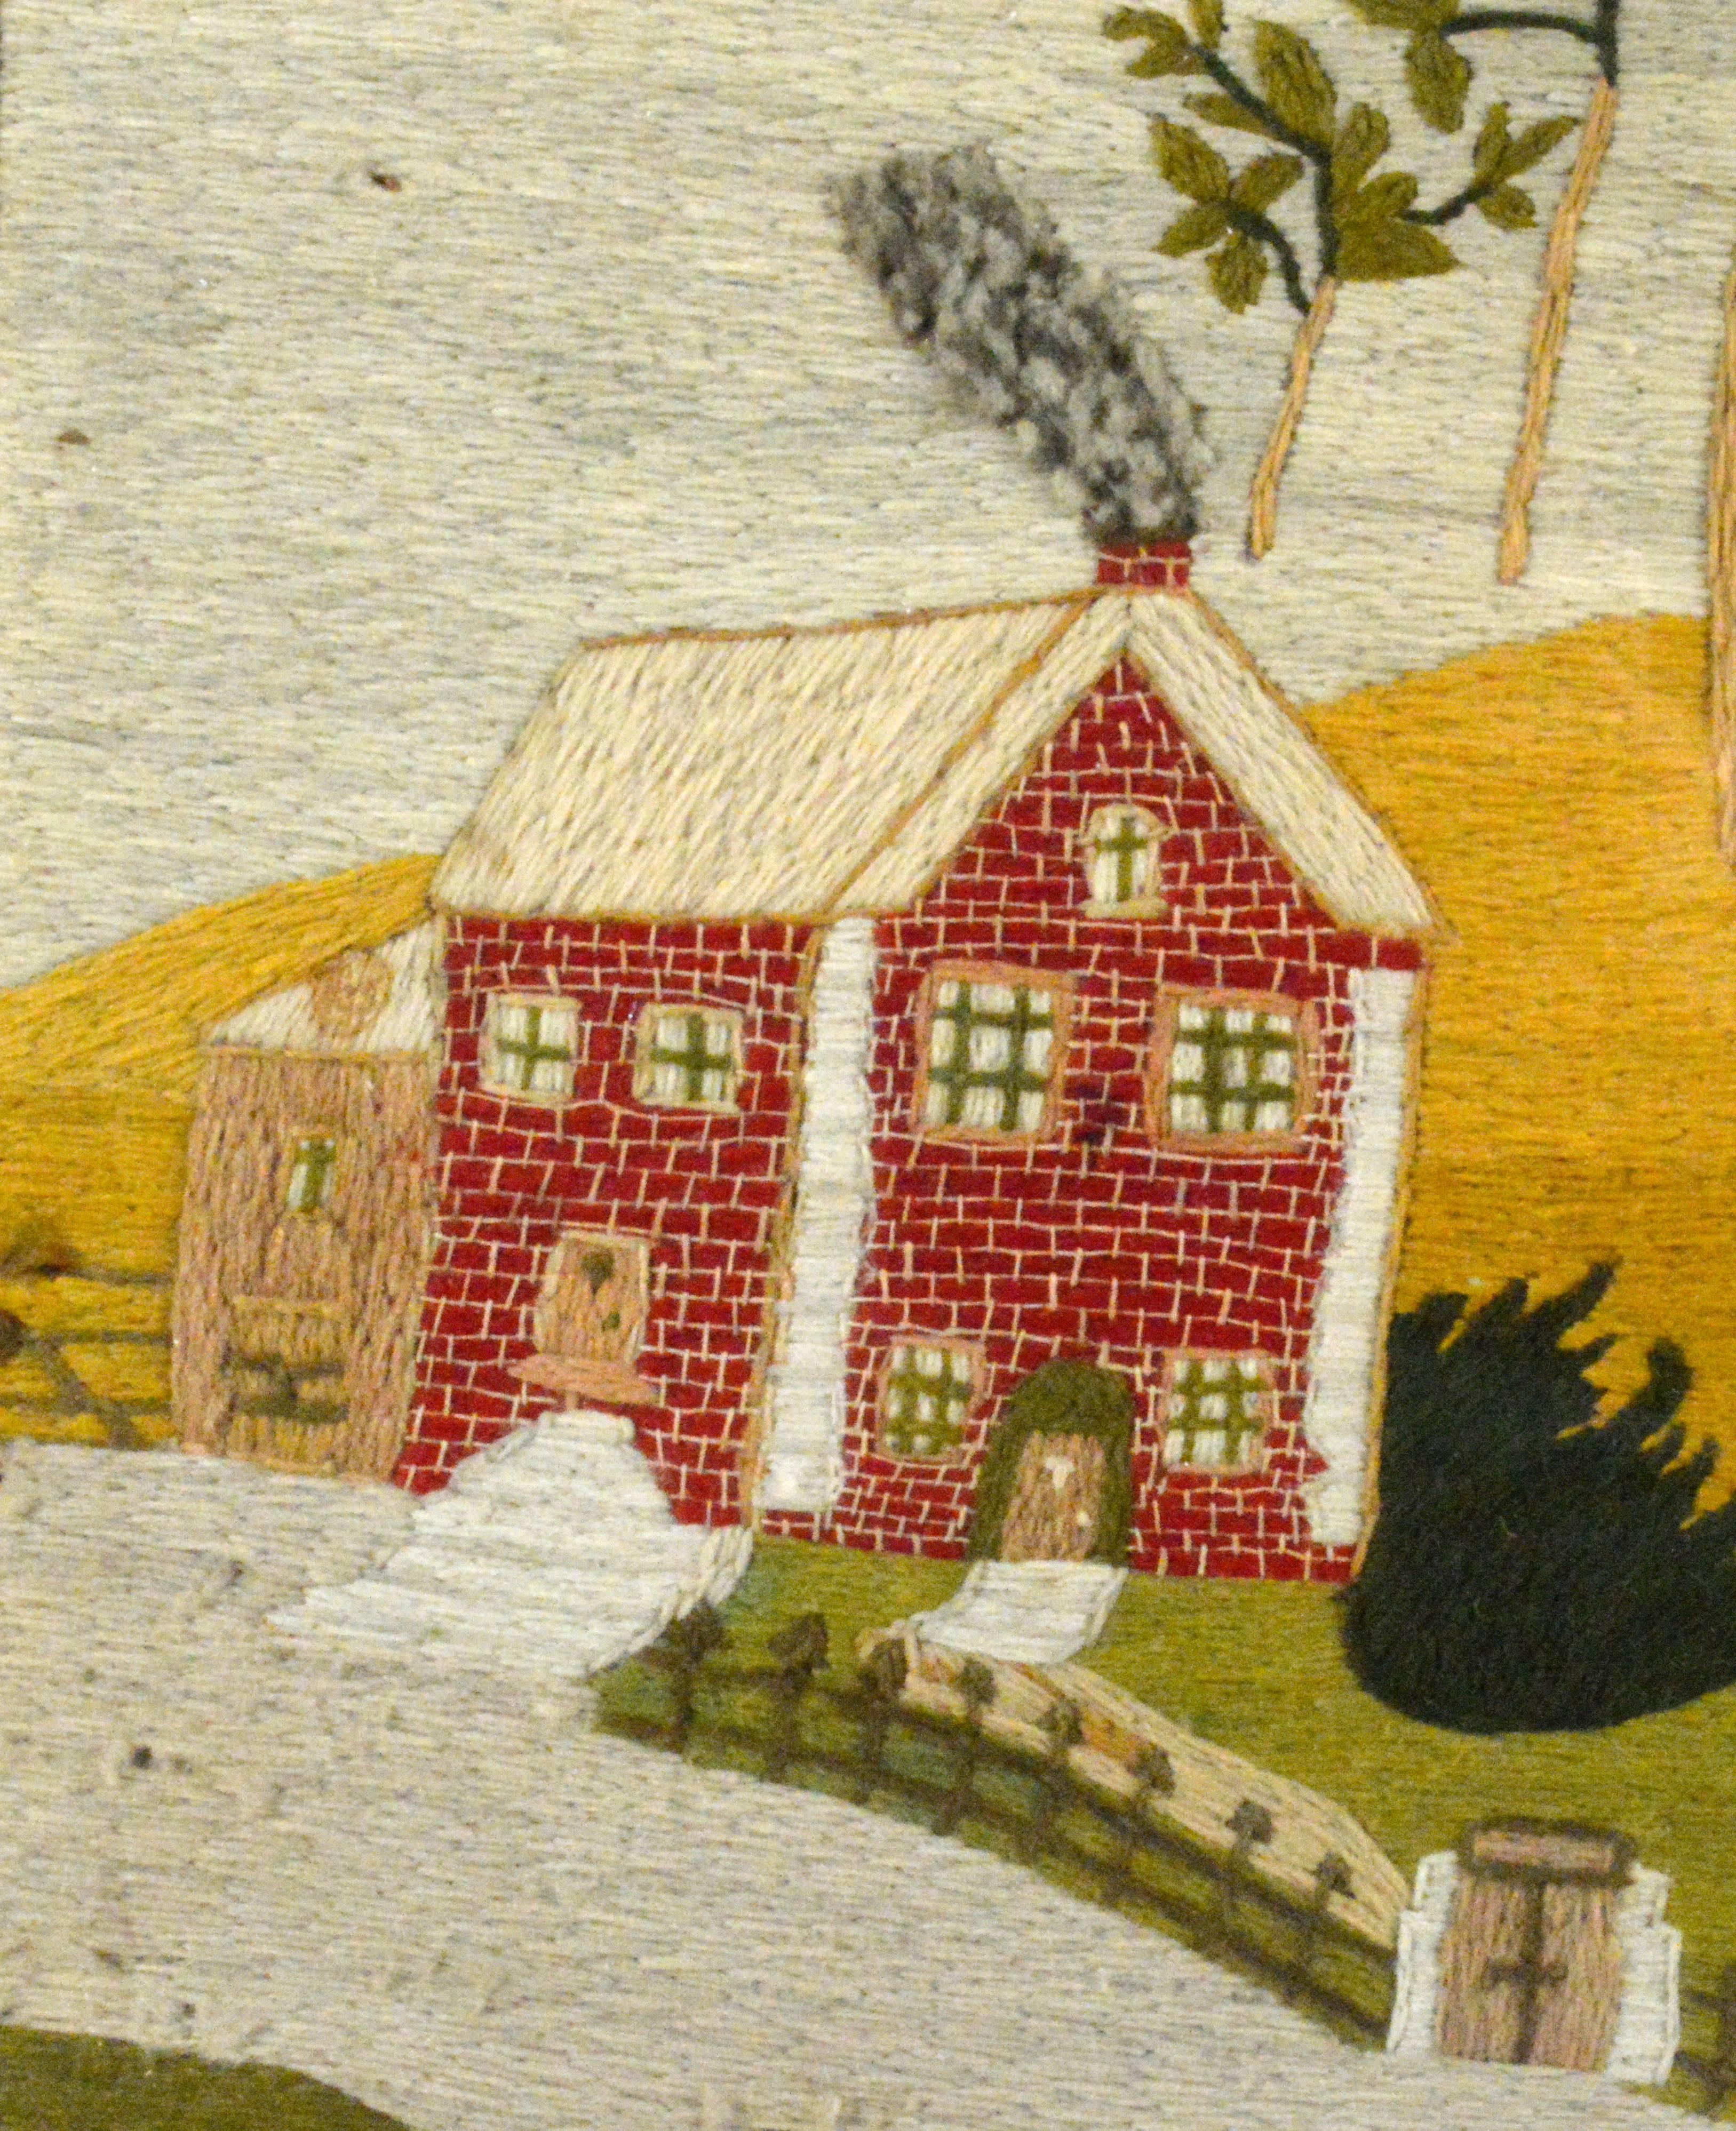 The sailor's woolwork or woolie depicts a landscape scene with a young woman walking along a path to a red brick house past a small garden which is fenced with bricks and metal railings. In the foreground on the path is a groom and his horse and